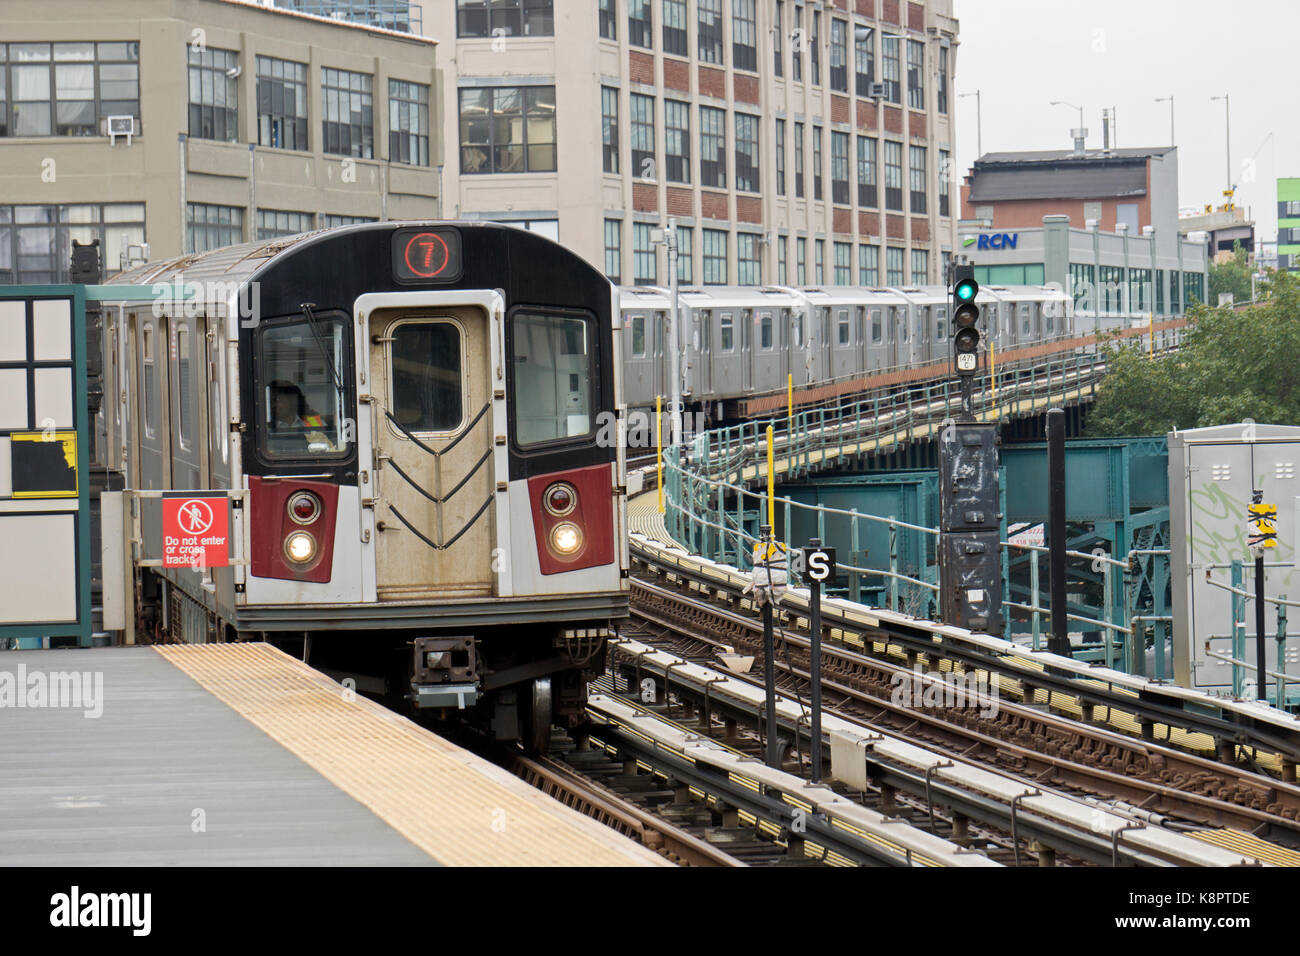 The #7 elevated subway train pulling into the 45th Road-Courthouse Square station in Long Island City Hunter's Point, Queens, New York. Stock Photo